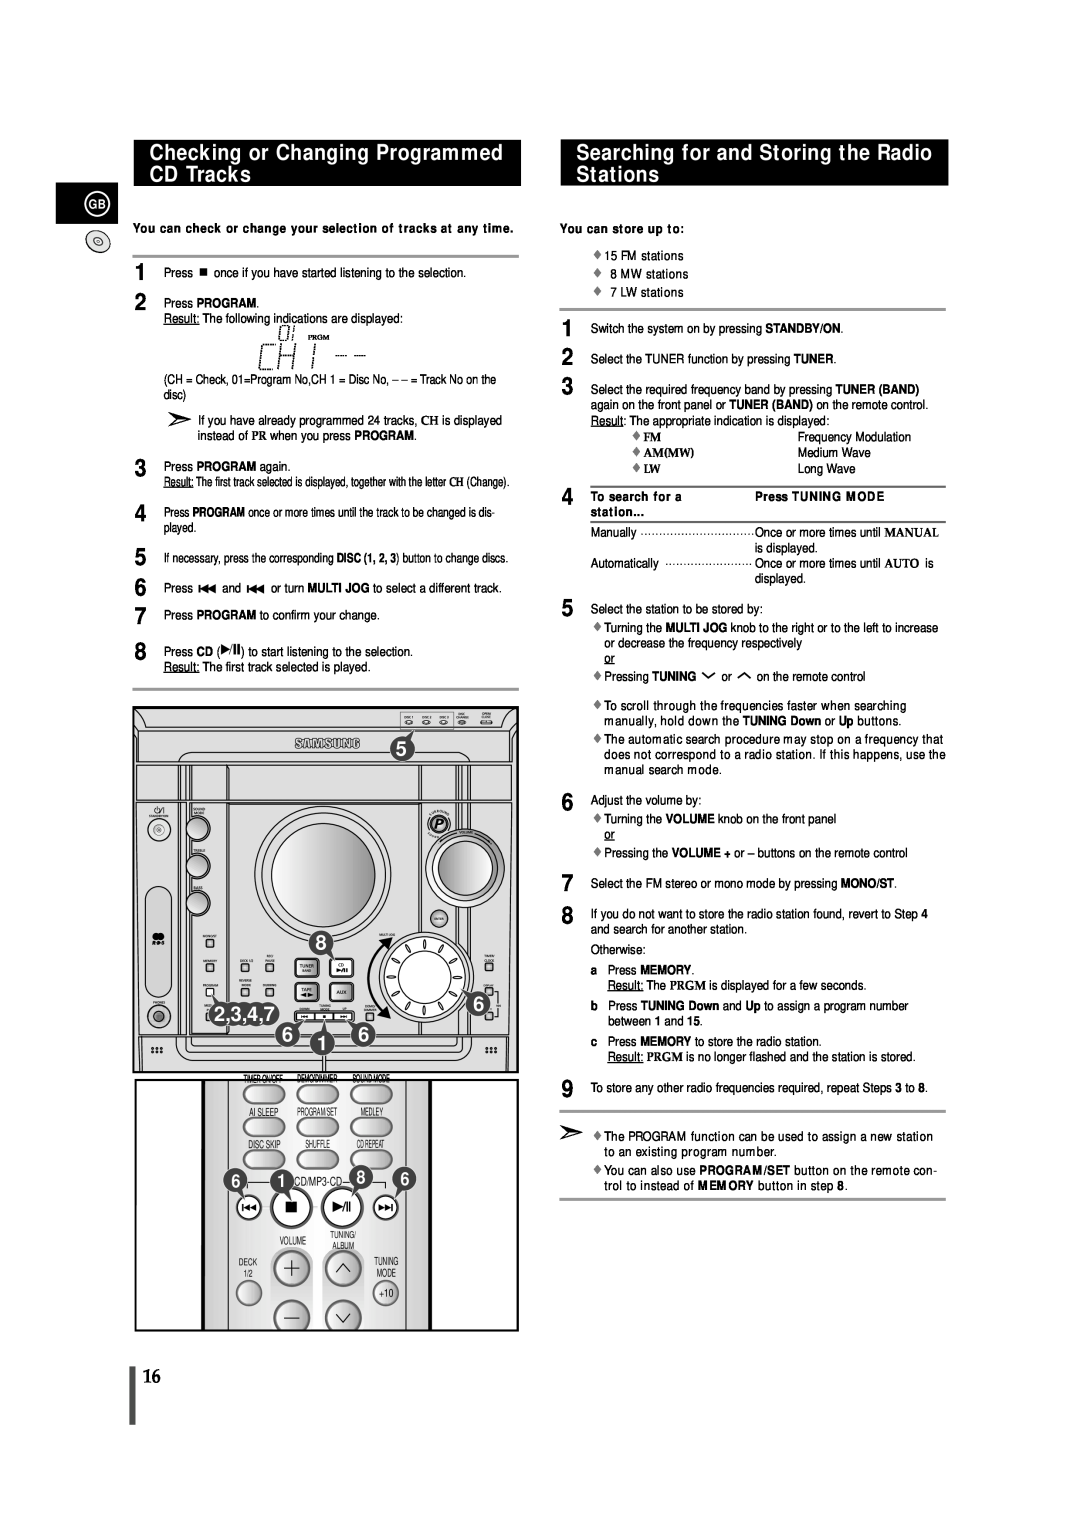 Samsung MAXZJ650RH/EDC Checking or Changing Programmed CD Tracks, Searching for and Storing the Radio Stations, 2,3,4,7 